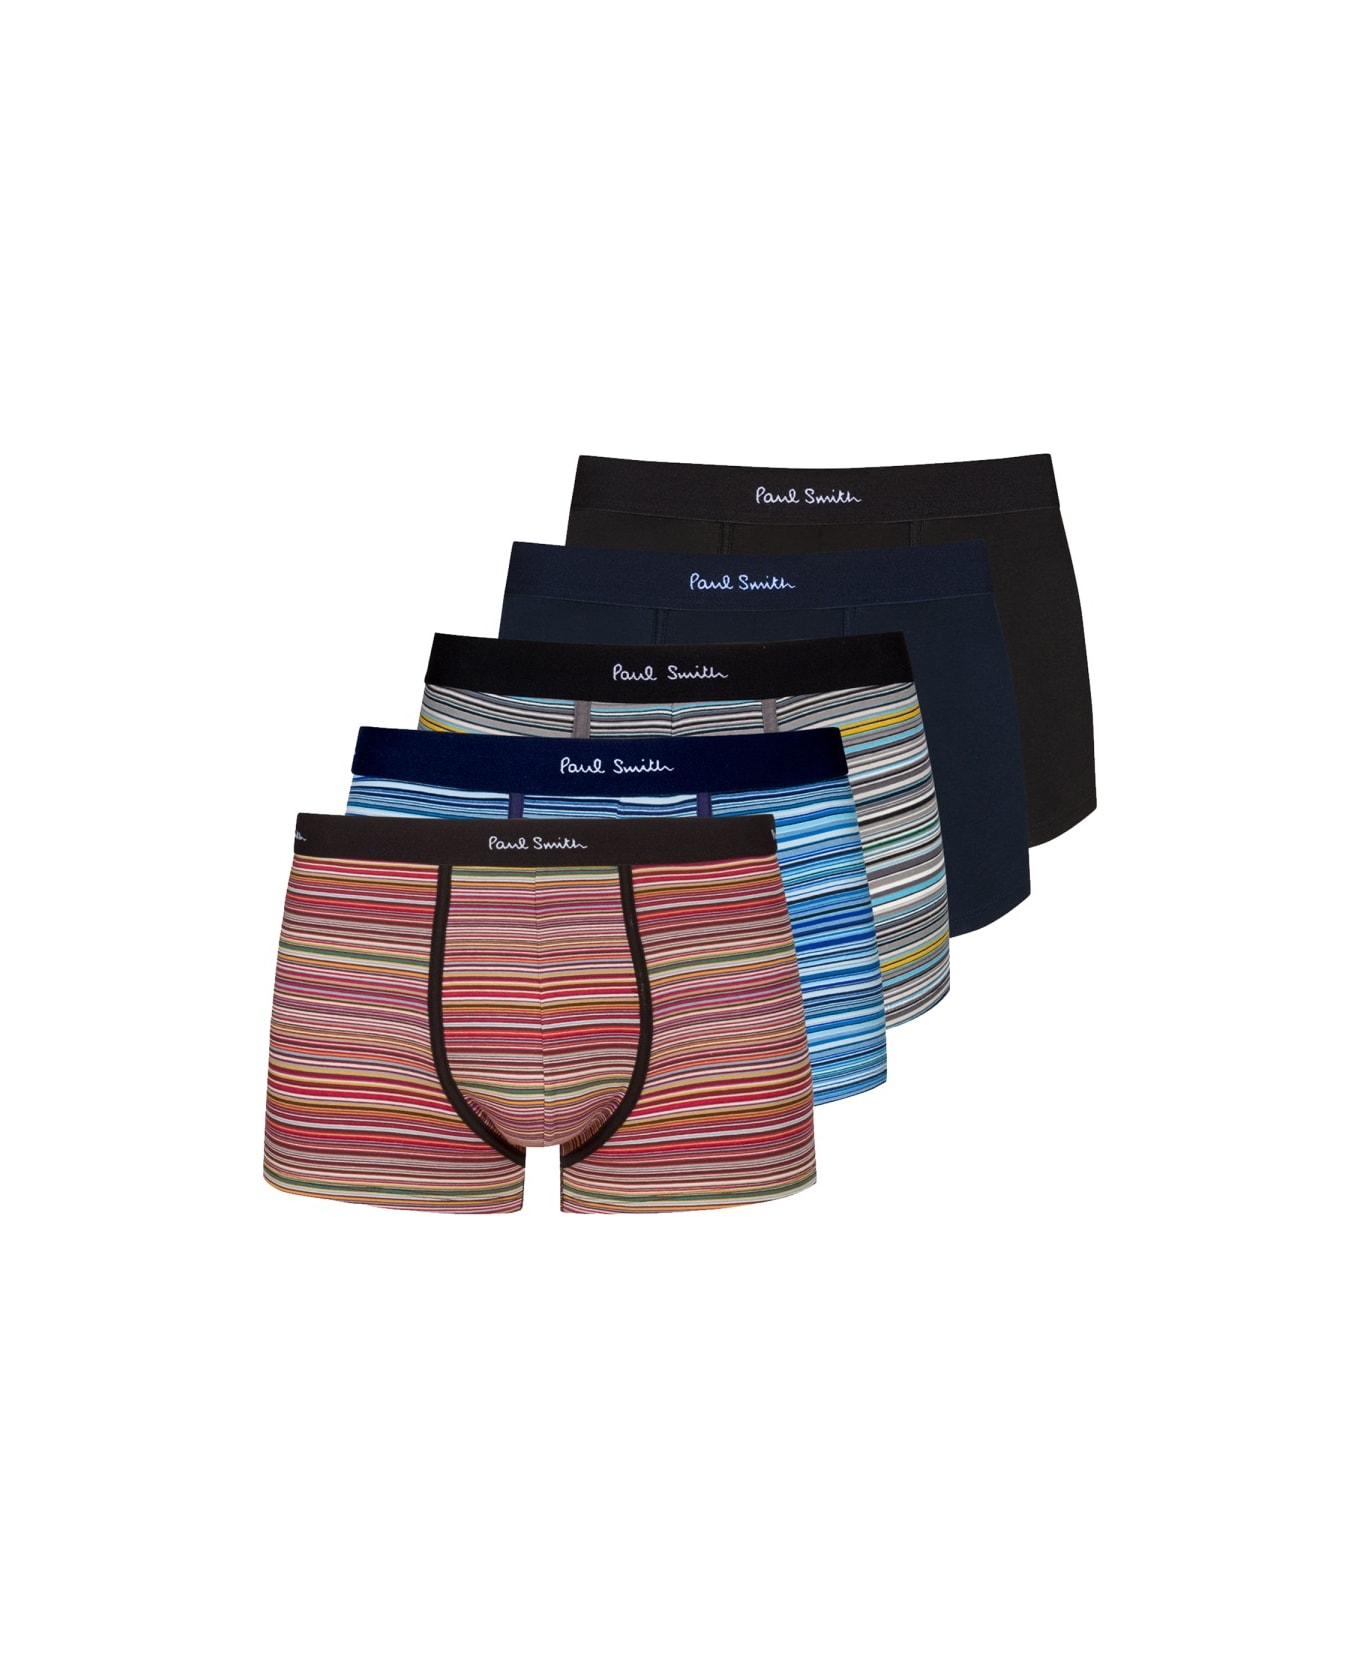 Paul Smith Pack Of Five Boxer Shorts - MULTICOLOUR ショーツ